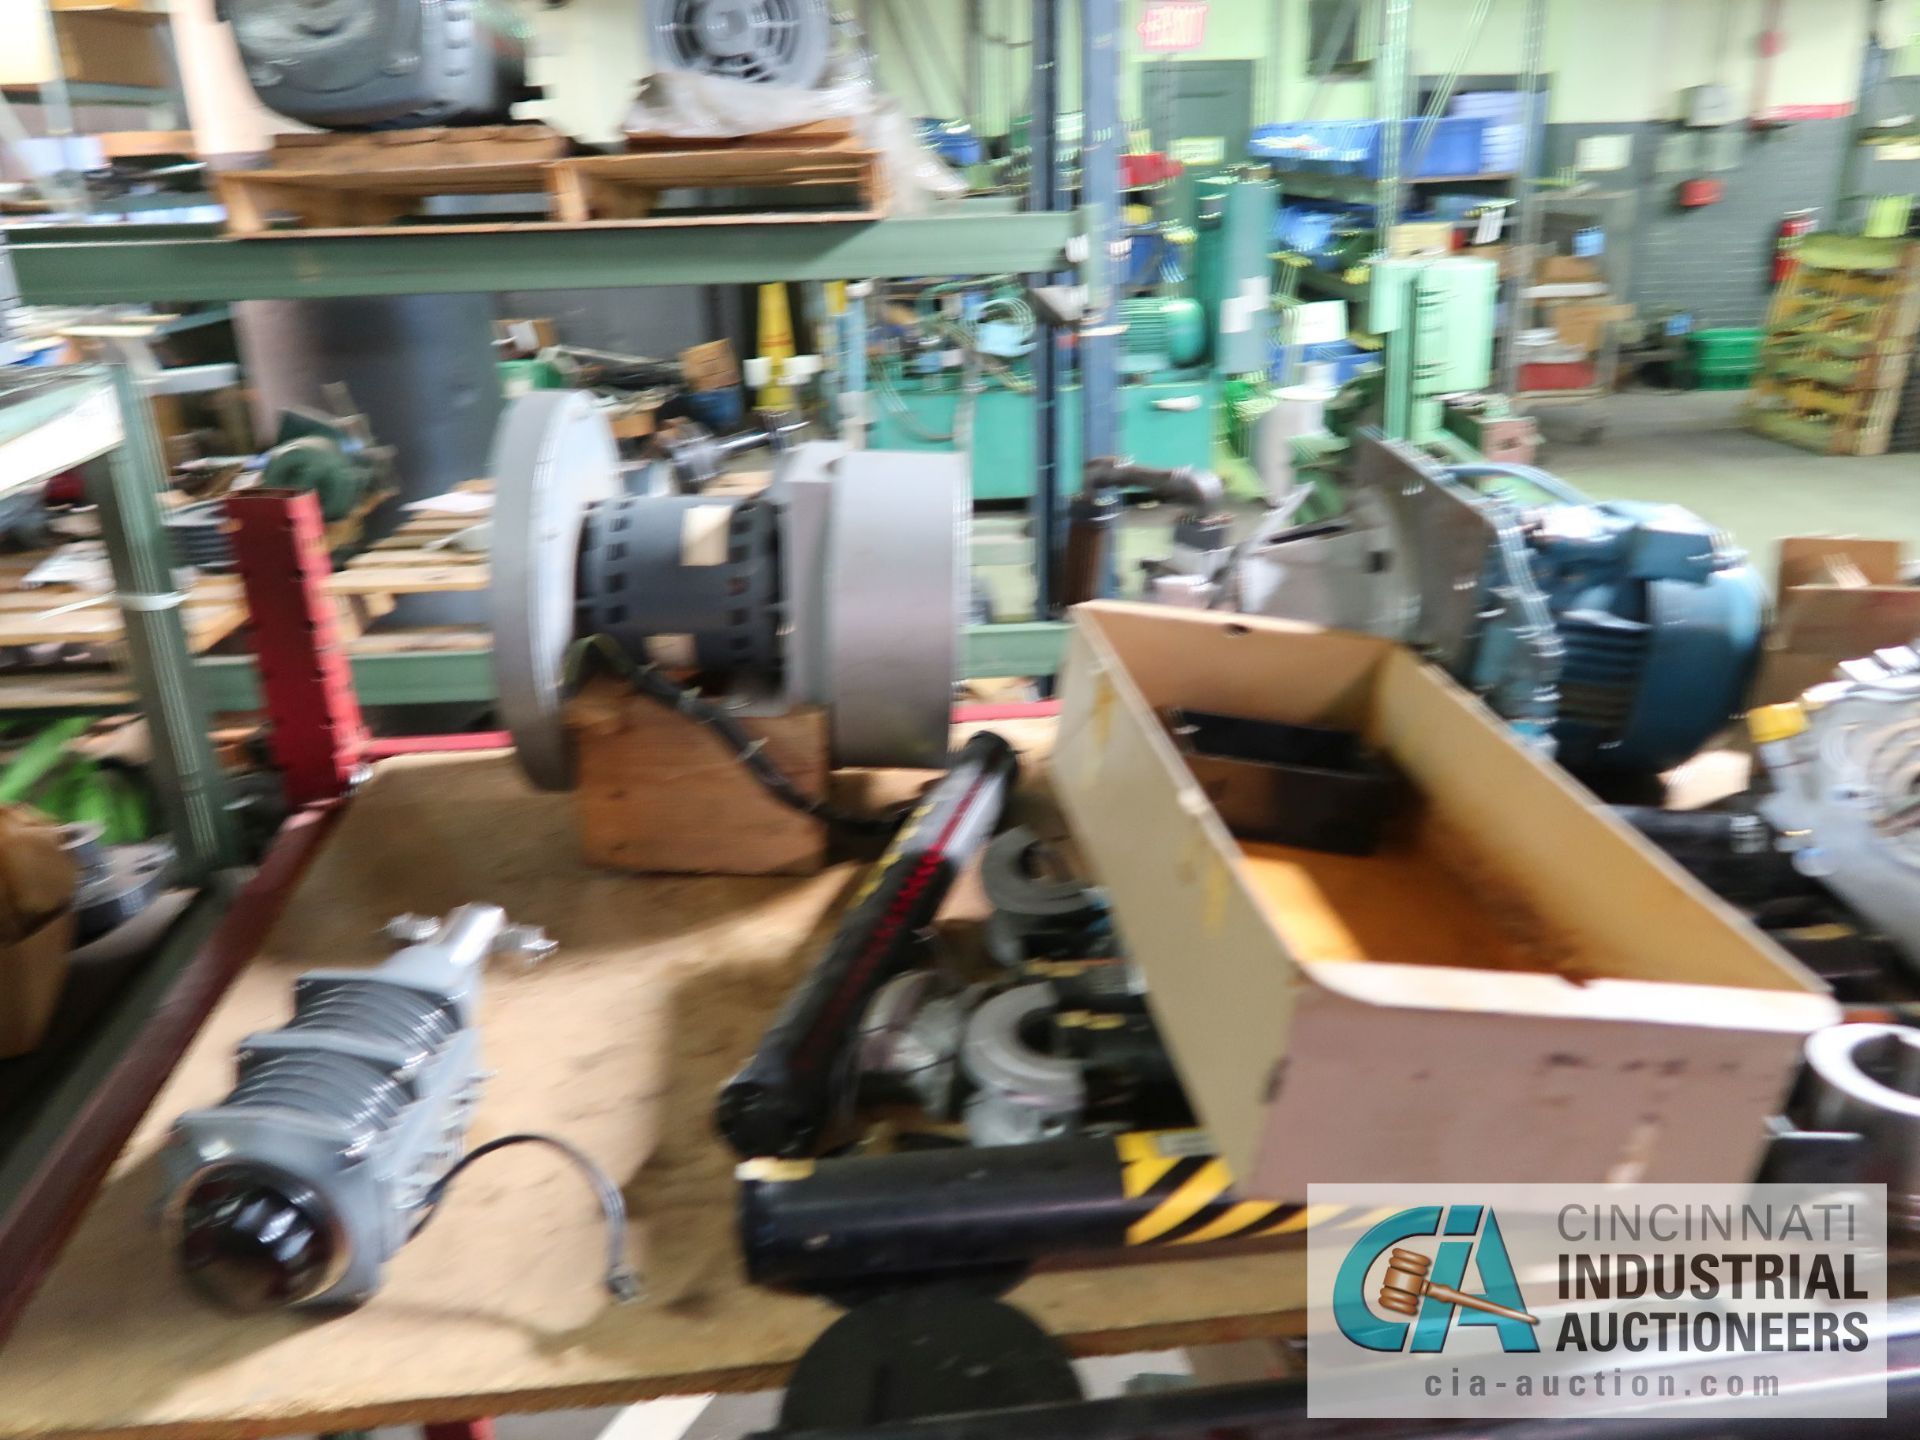 (LOT) MACHINE PARTS, COMPRESSORS, REDUCERS, GEARS, MOTORS, AND OTHER (4) SECTIONS RACK - Image 6 of 28